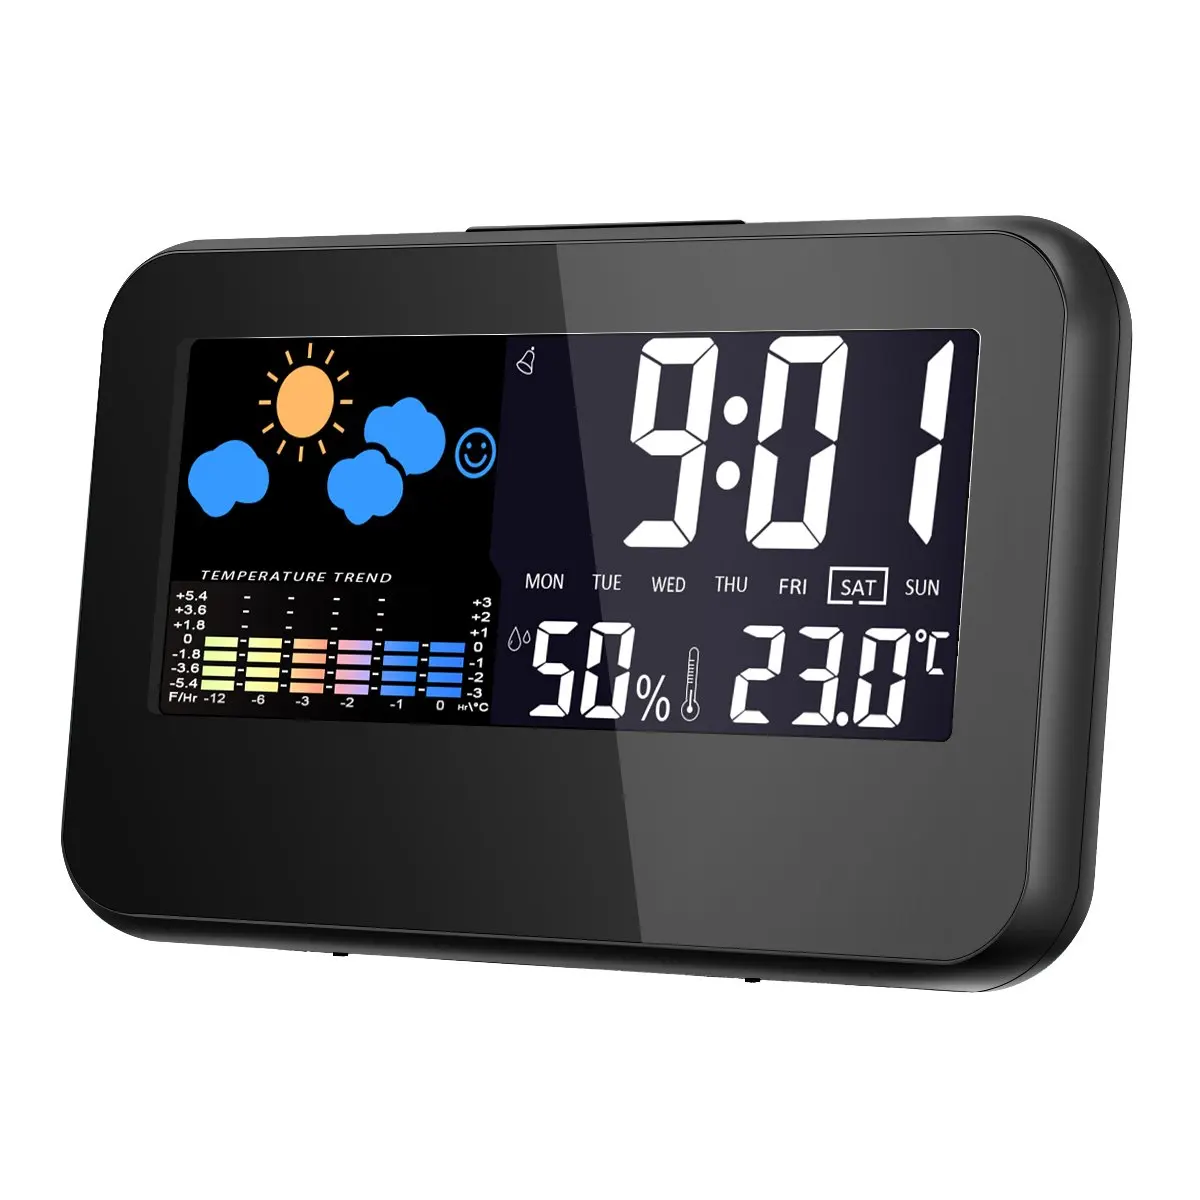 Cheap Monitor Clock, find Monitor Clock deals on line at Alibaba.com